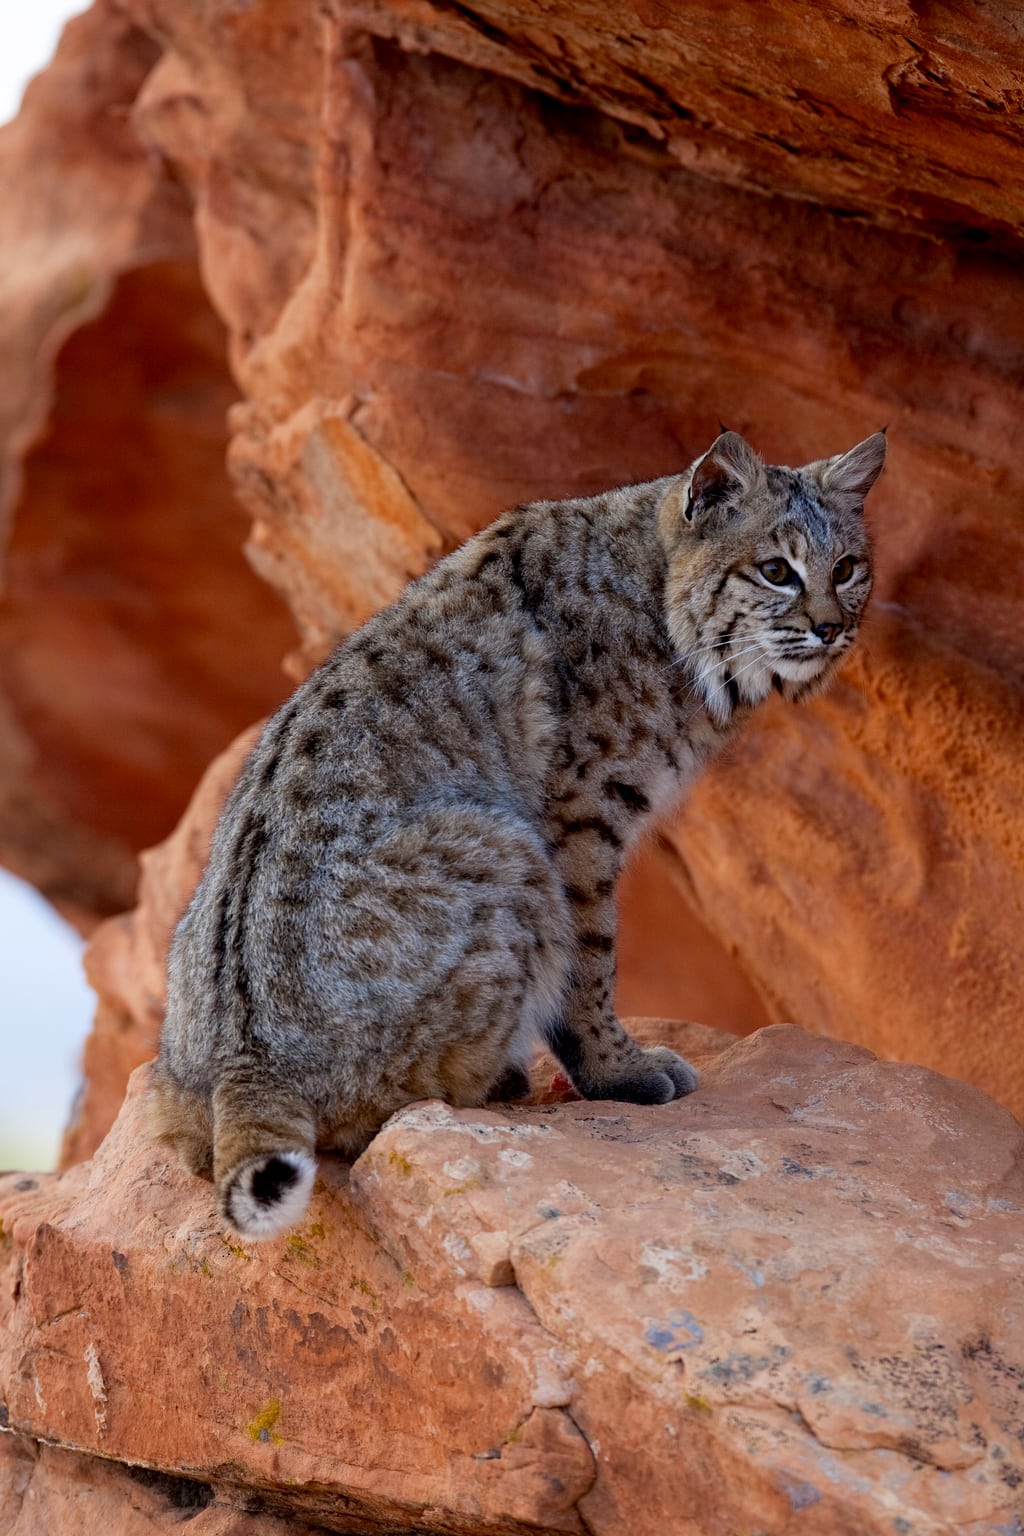 A Bobcat sitting on red rocks near a cave in Arizona